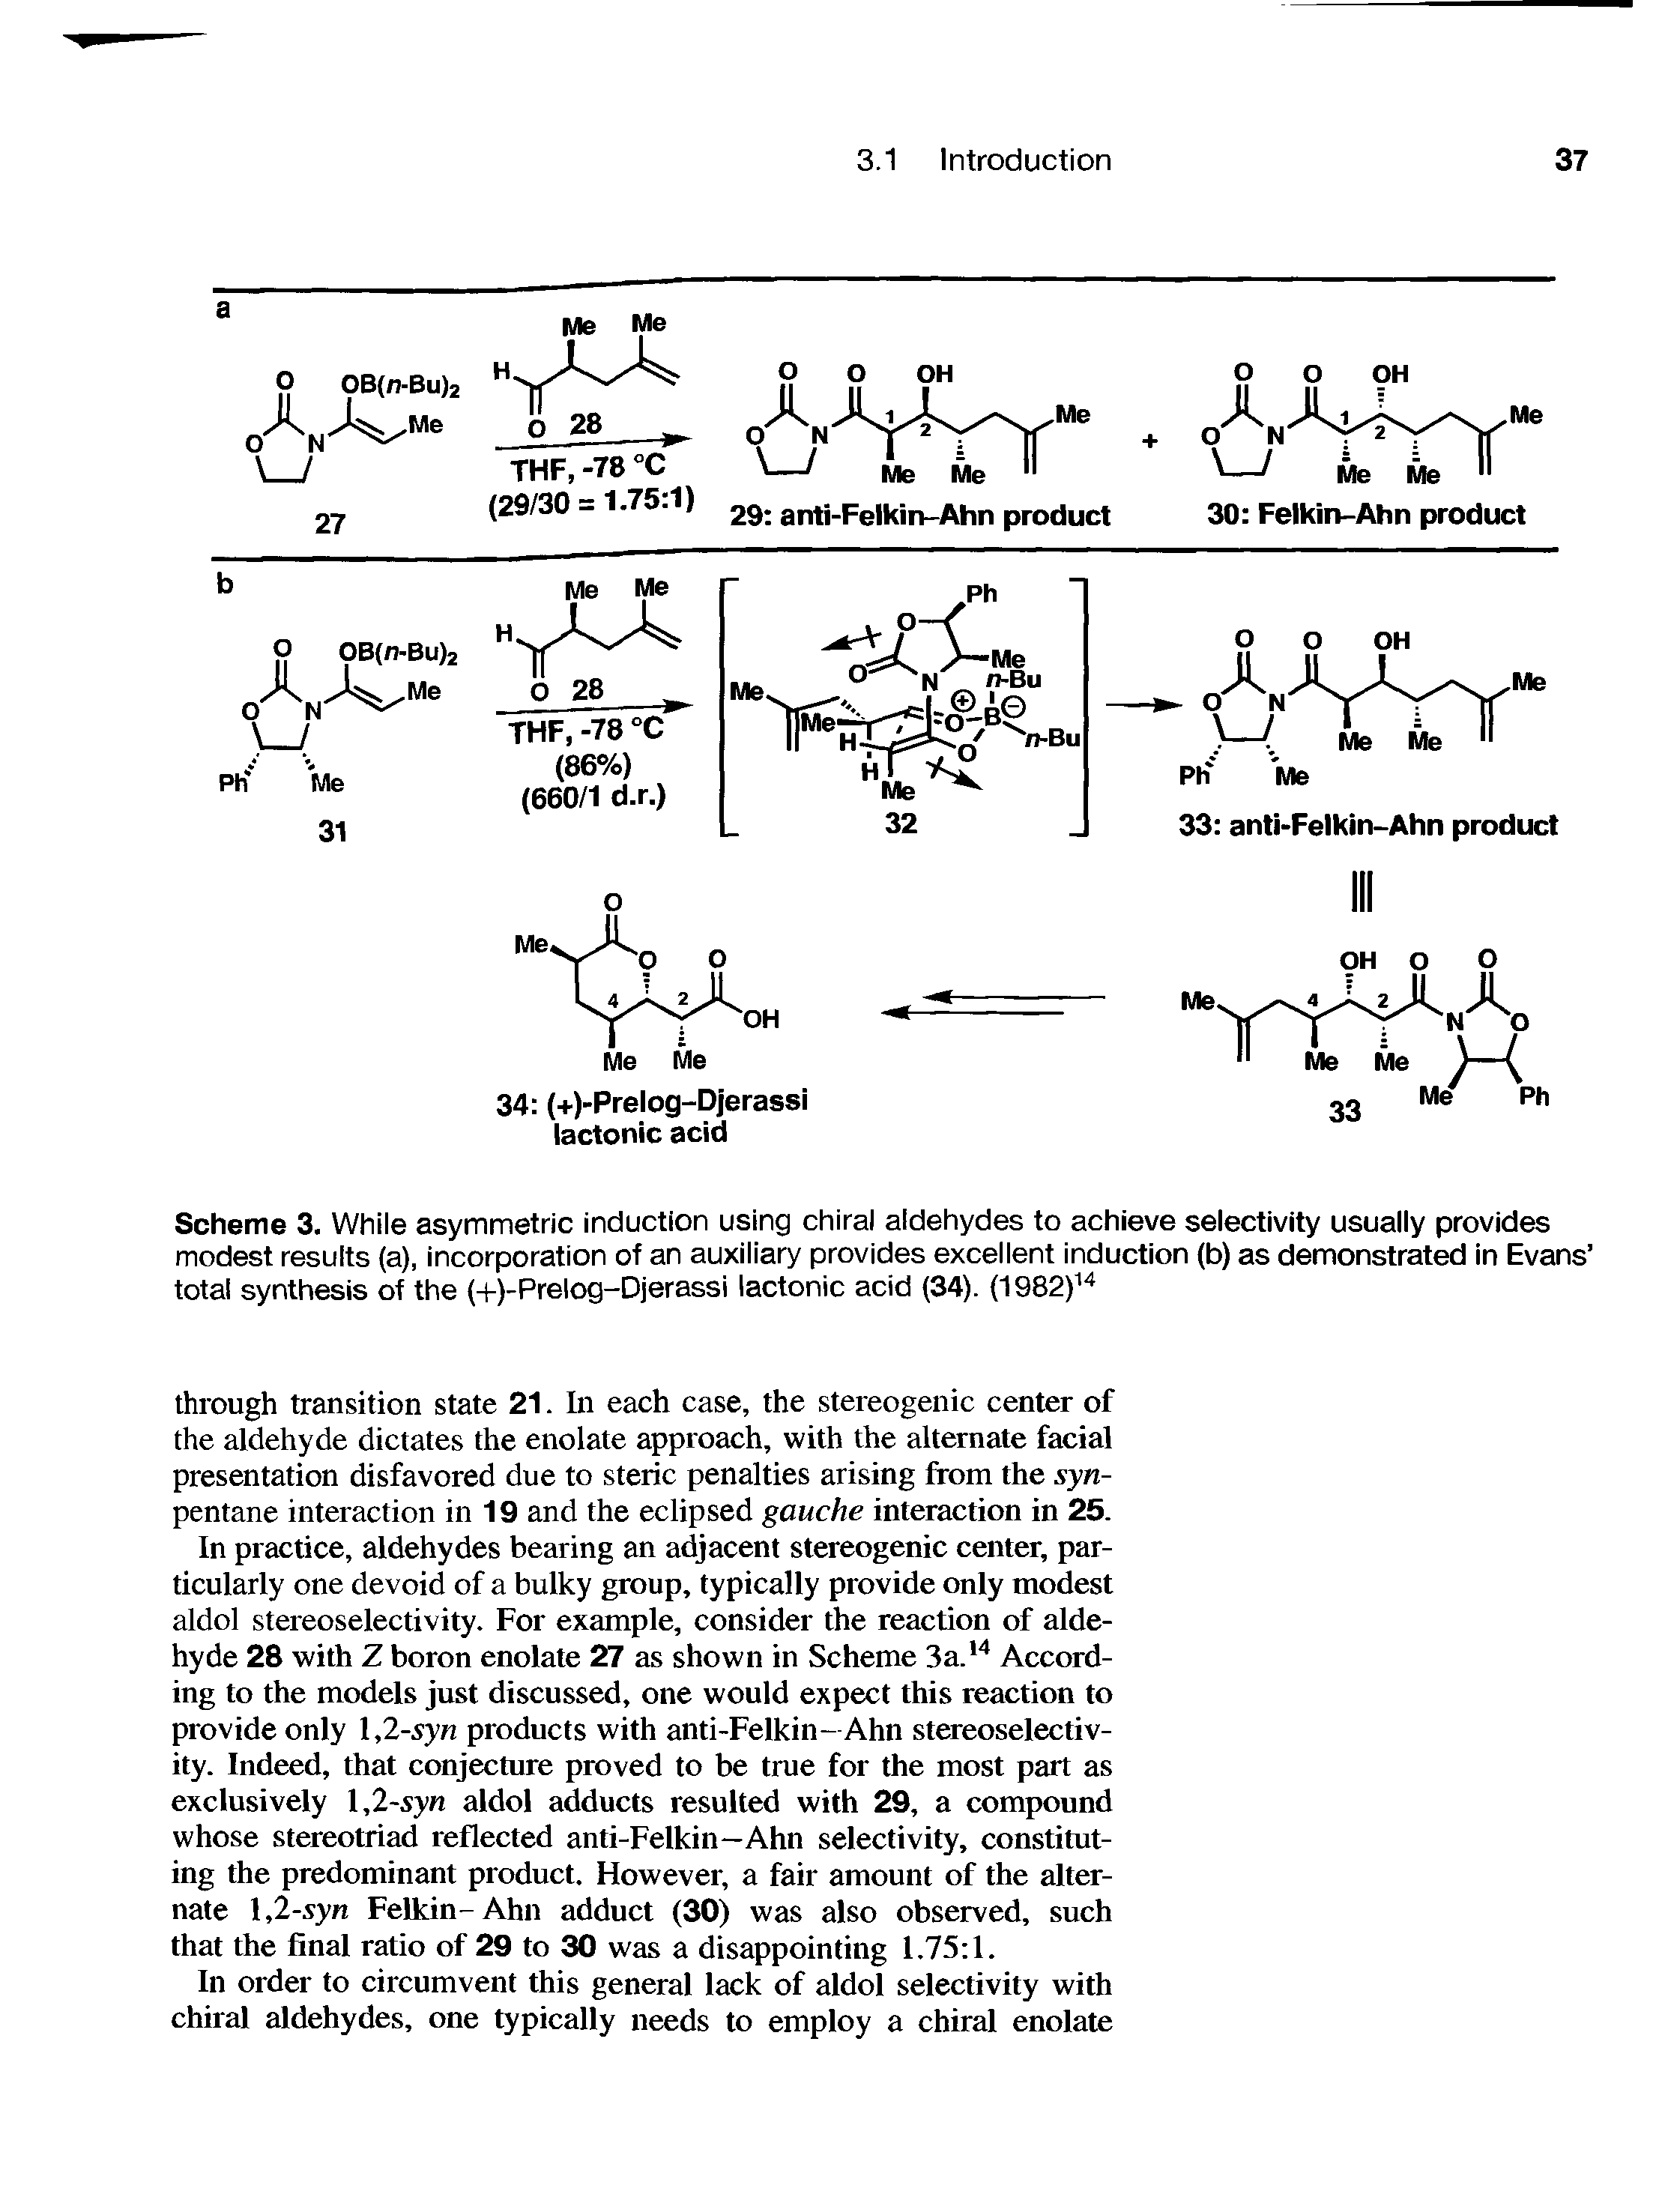 Scheme 3. While asymmetric induction using chiral aldehydes to achieve selectivity usually provides modest results (a), incorporation of an auxiliary provides excellent induction (b) as demonstrated in Evans total synthesis of the (+)-Prelog-Djerassi lactonic acid (34). (1982) ...